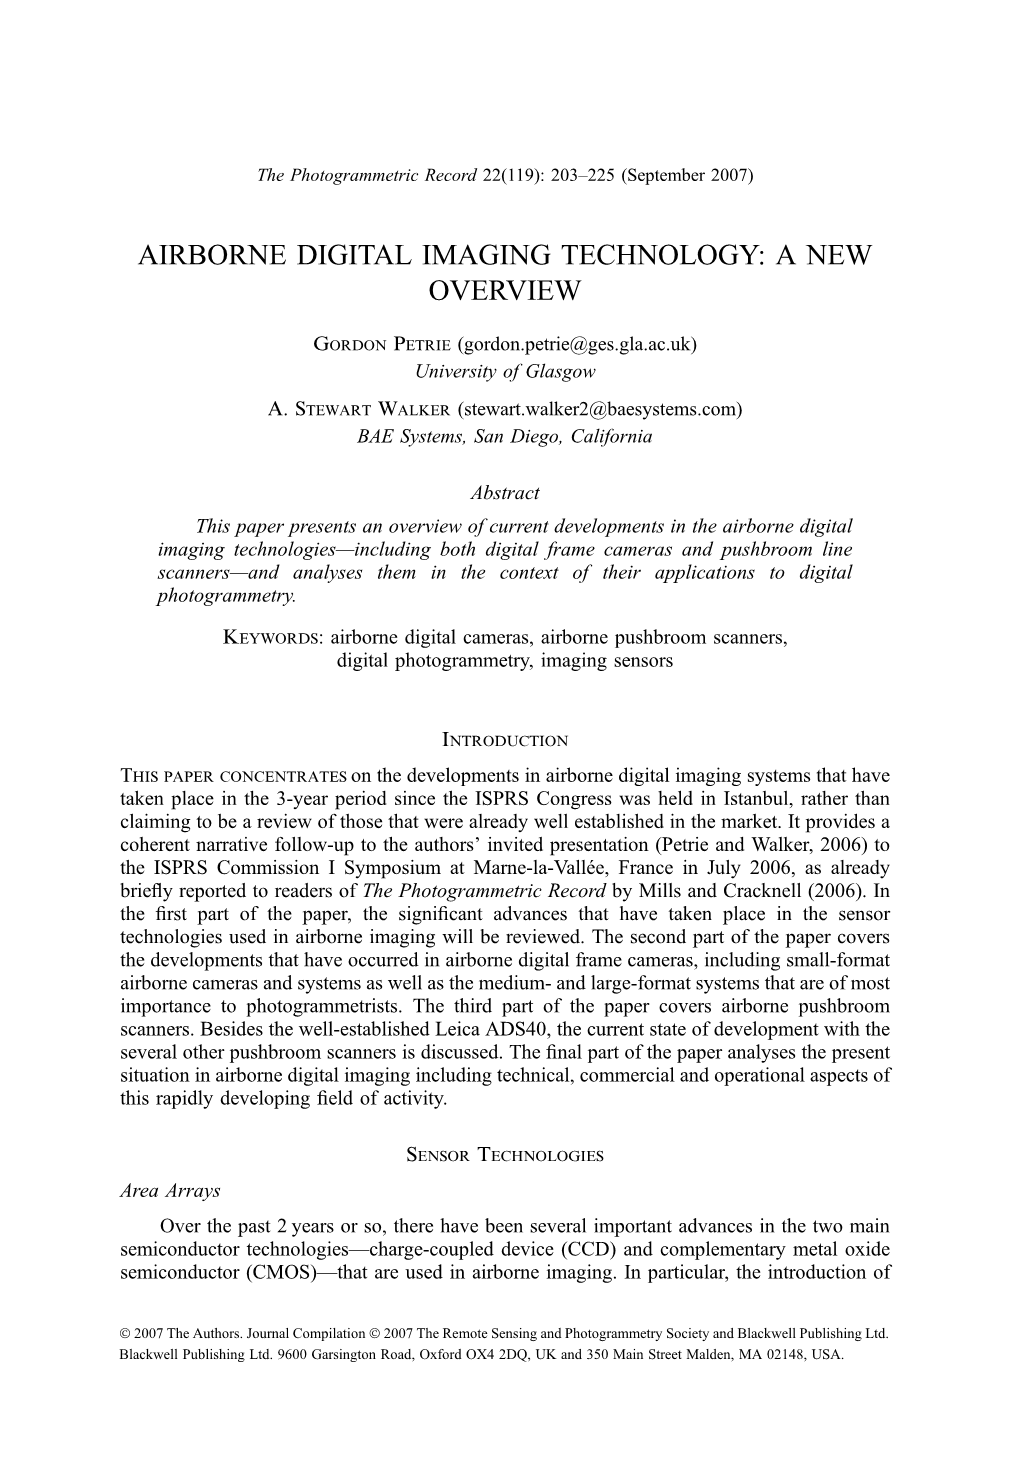 Airborne Digital Imaging Technology: a New Overview